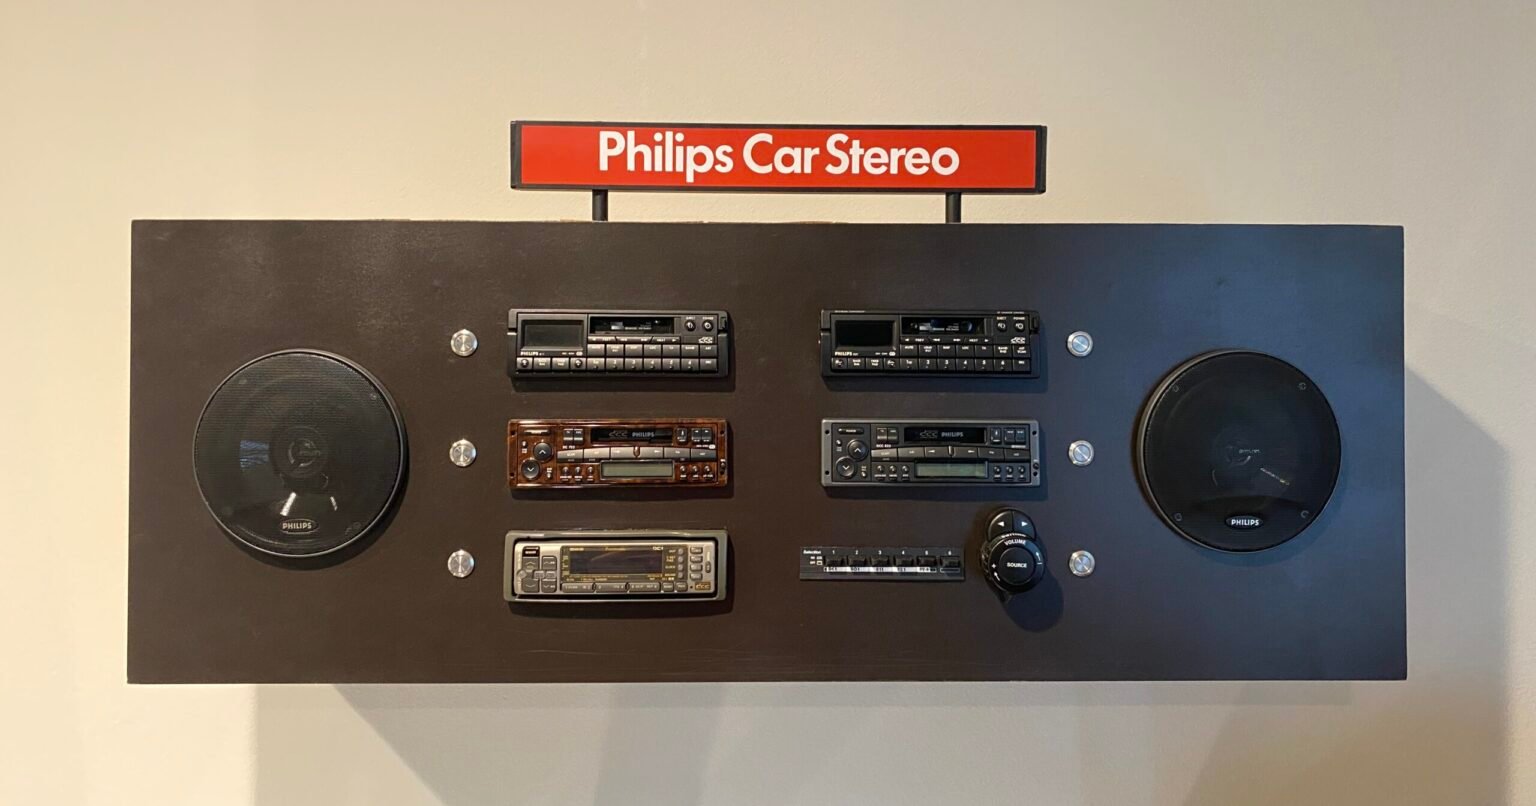 DCC Museum - The Philips Car Stereo Display